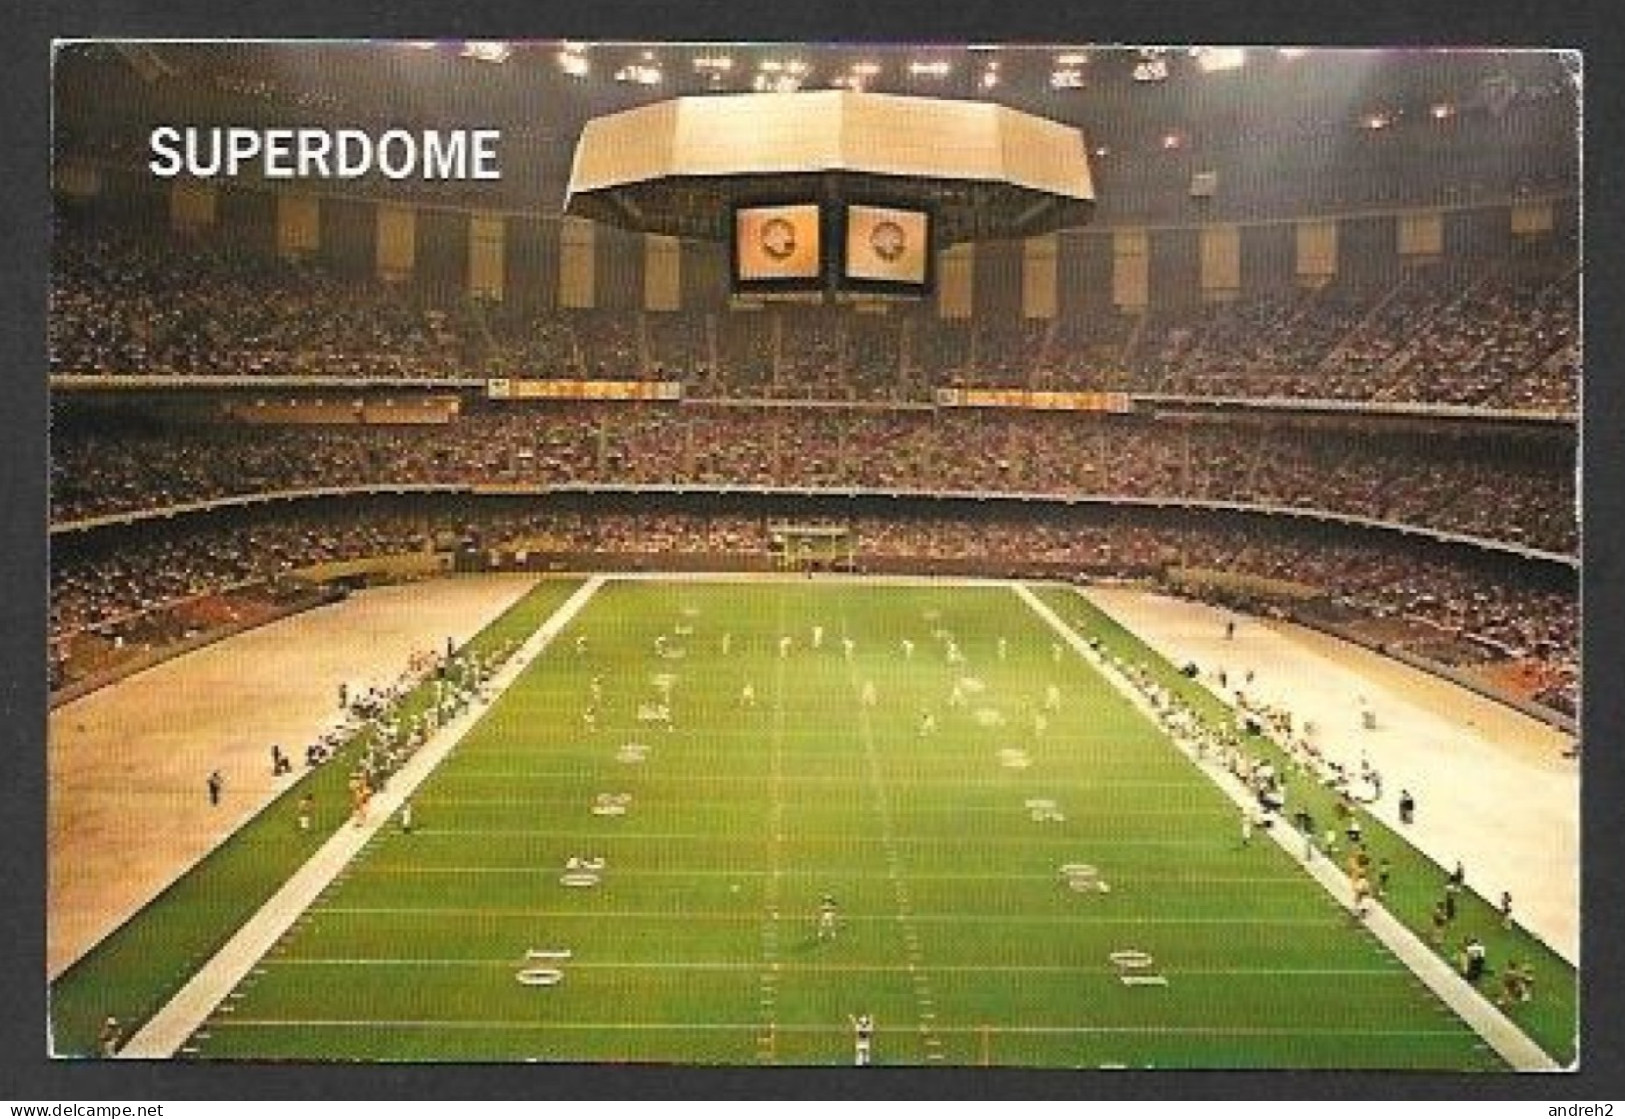 New Orleans  Louisiana - Louisiana Superdome New Orleans,The World's Enclosed Stadium Football Games Will Seat 80,000 - New Orleans